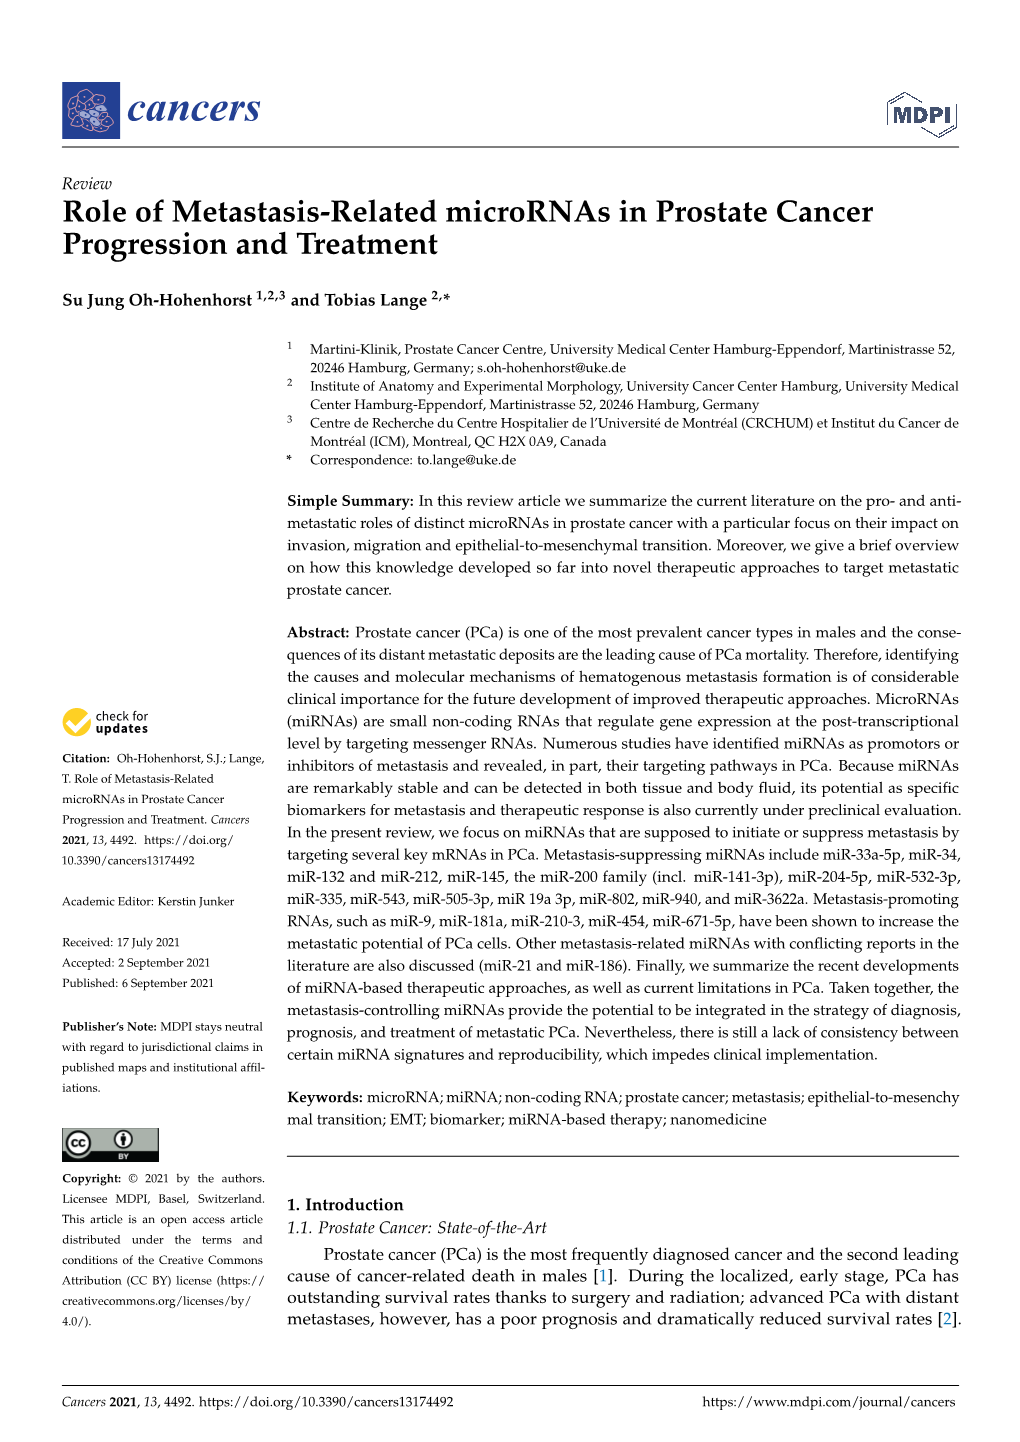 Role of Metastasis-Related Micrornas in Prostate Cancer Progression and Treatment